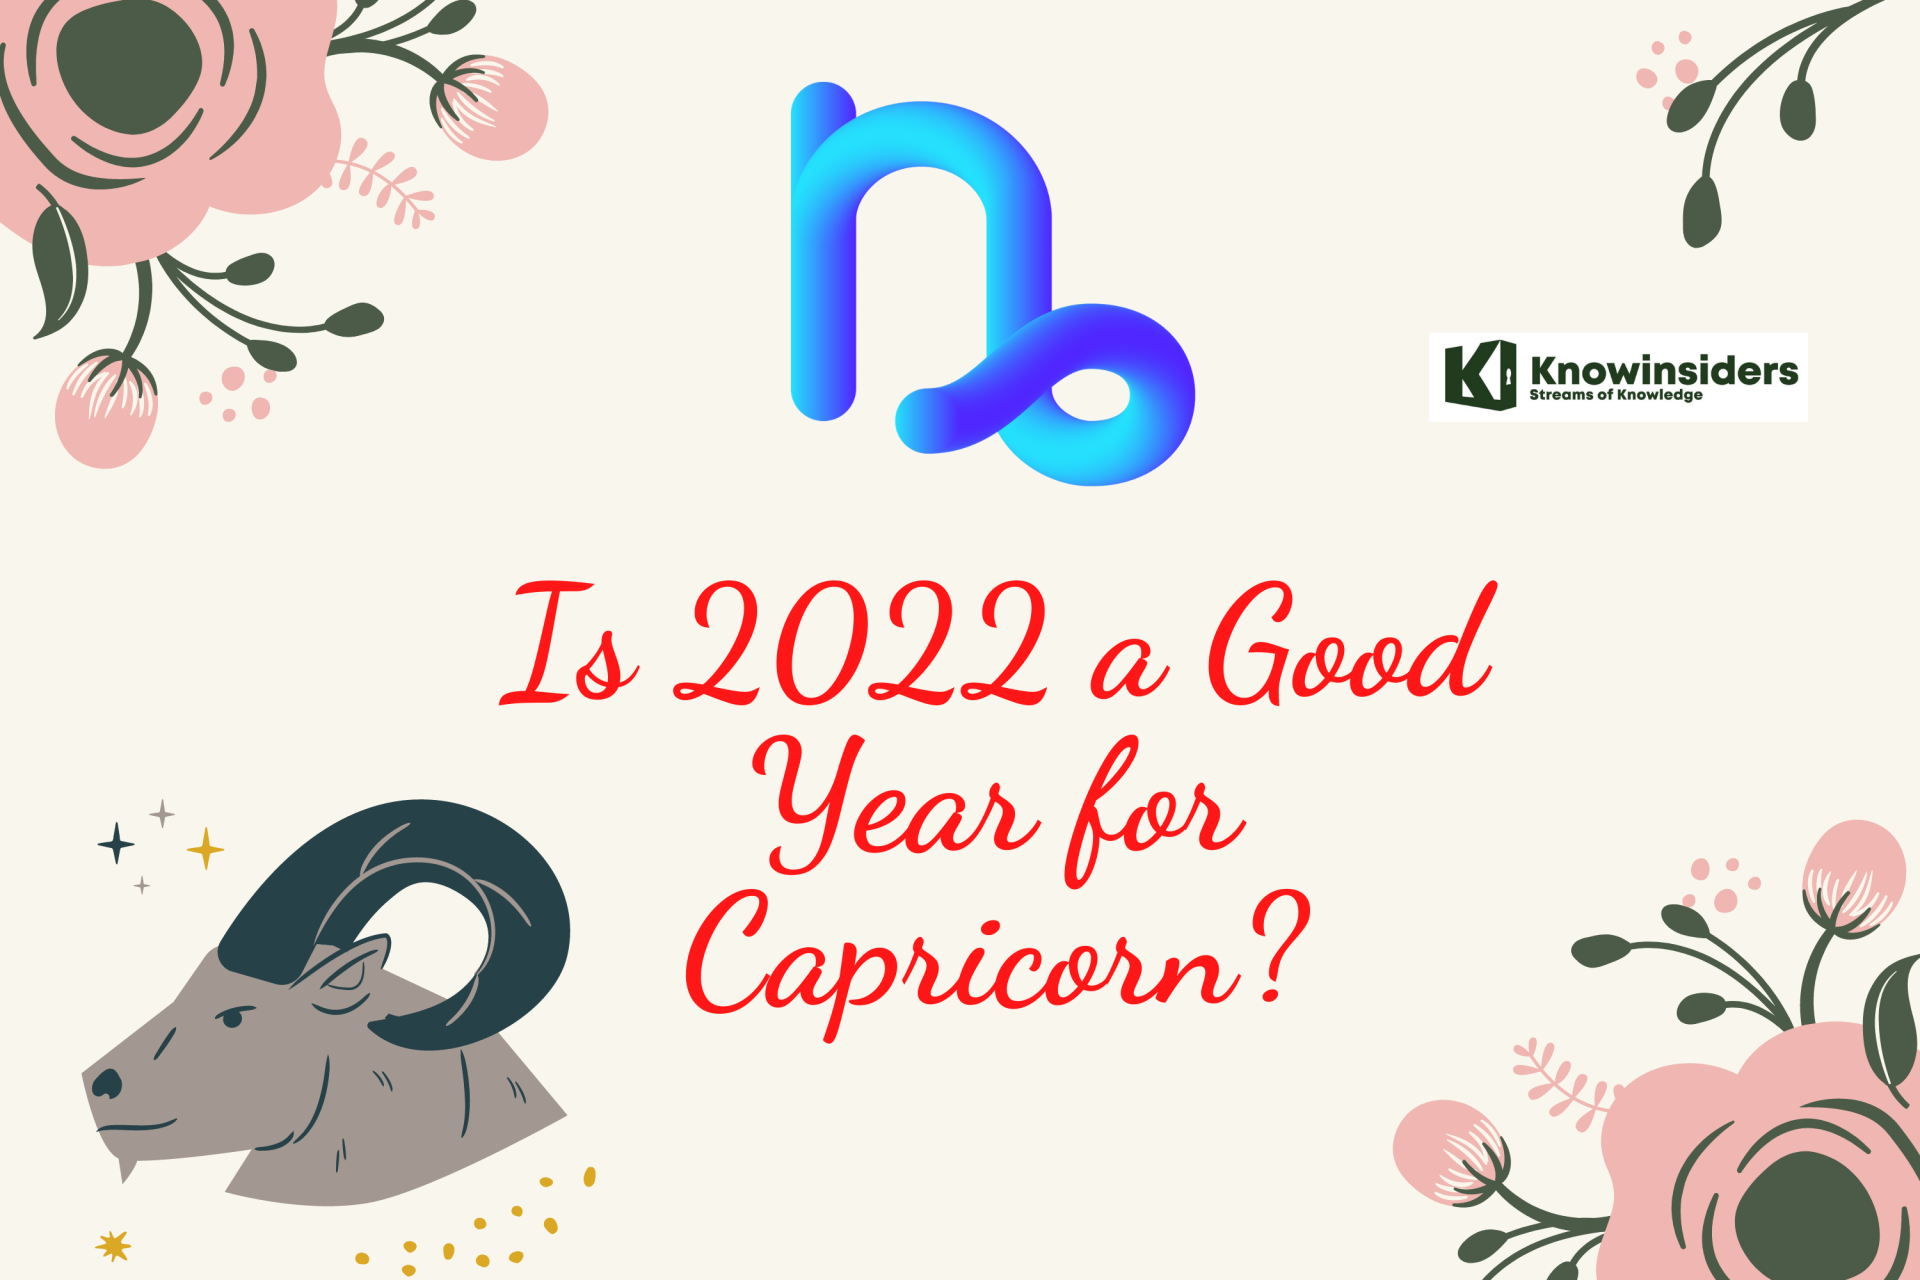 CAPRICORN March 2022 Horoscope: Monthly Prediction for Love, Career, Money and Health